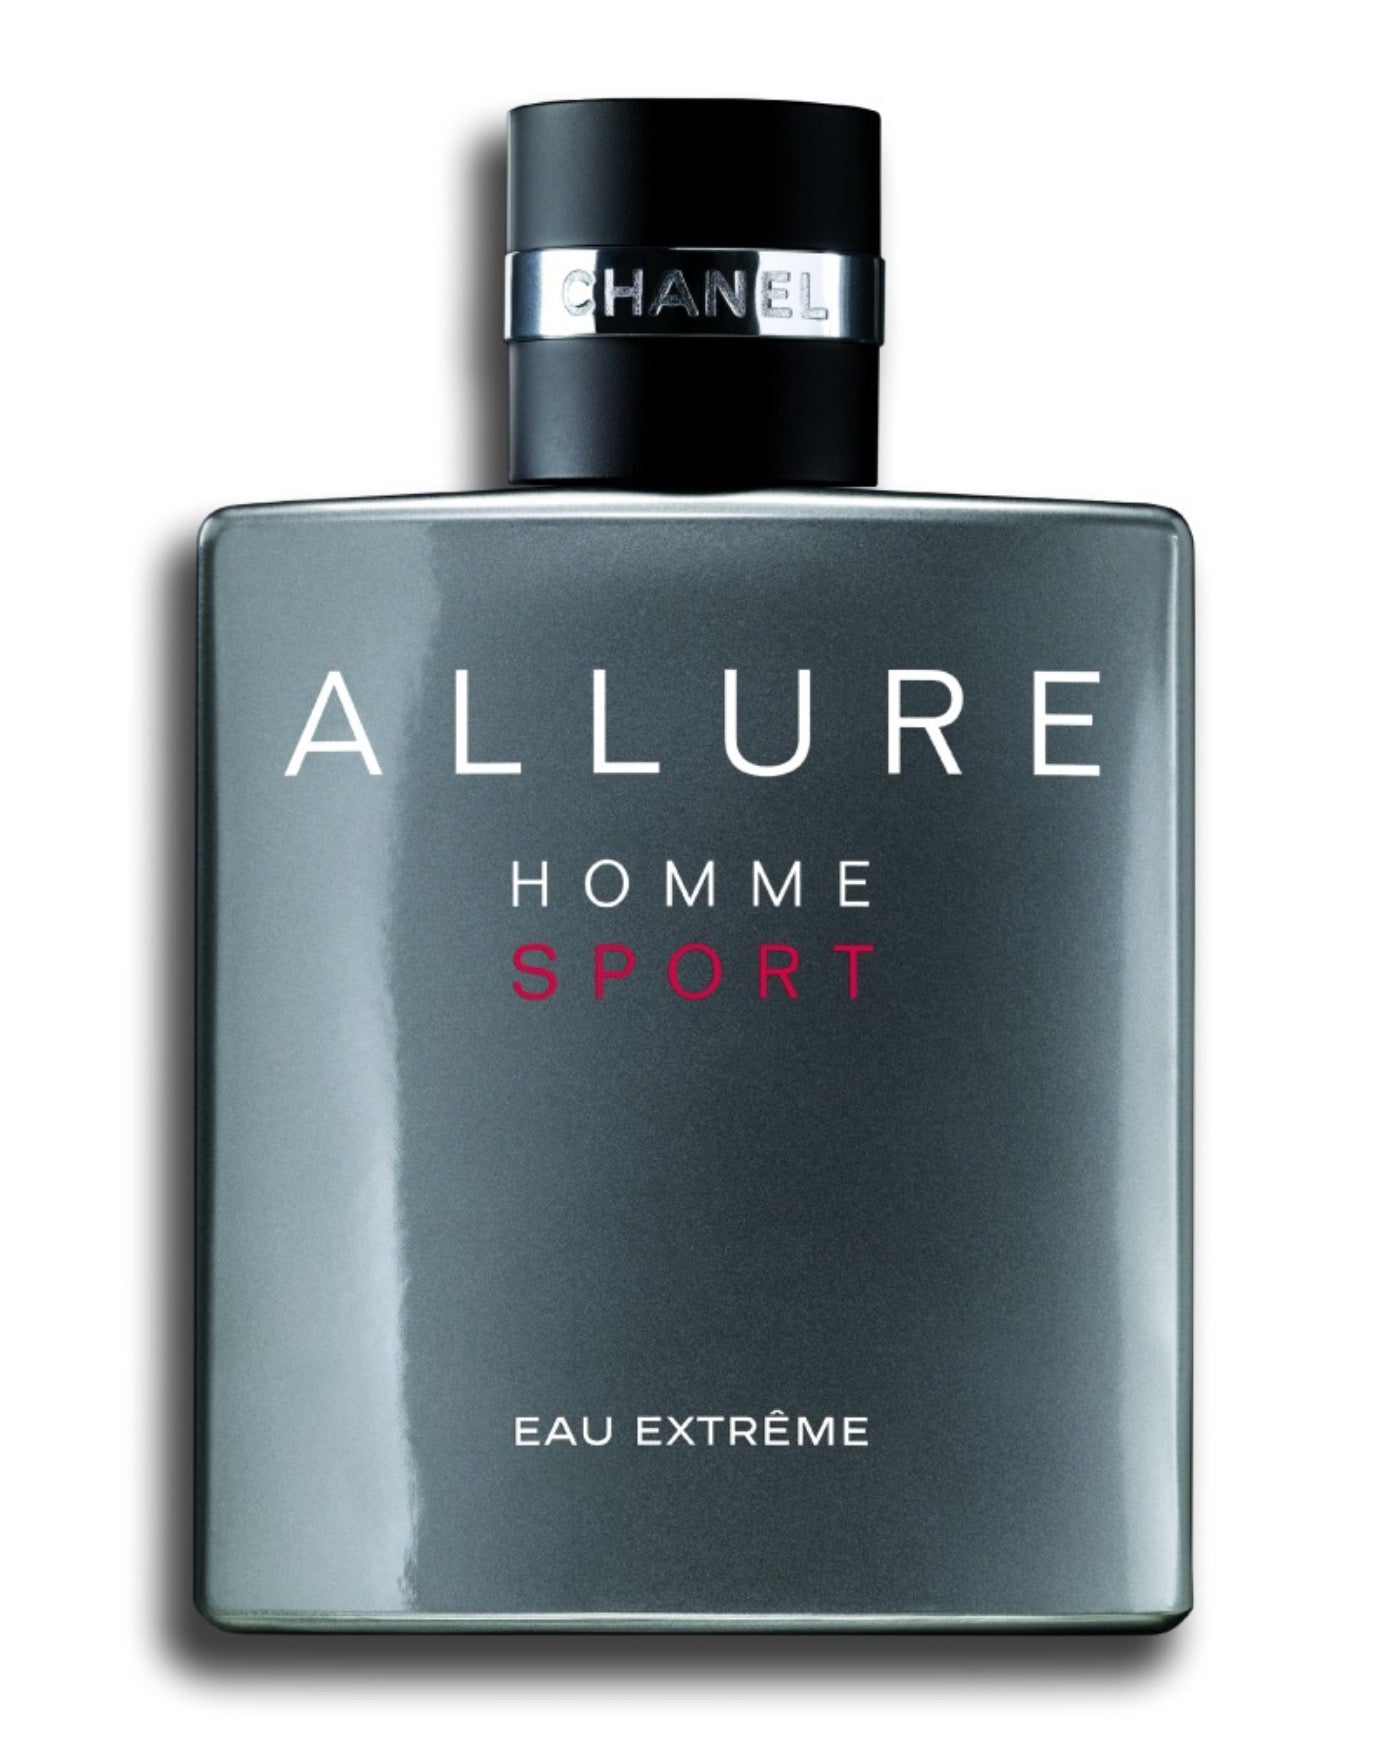 The SEXY Compliment Getter YOU NEED. Chanel Allure Homme Sport Eau